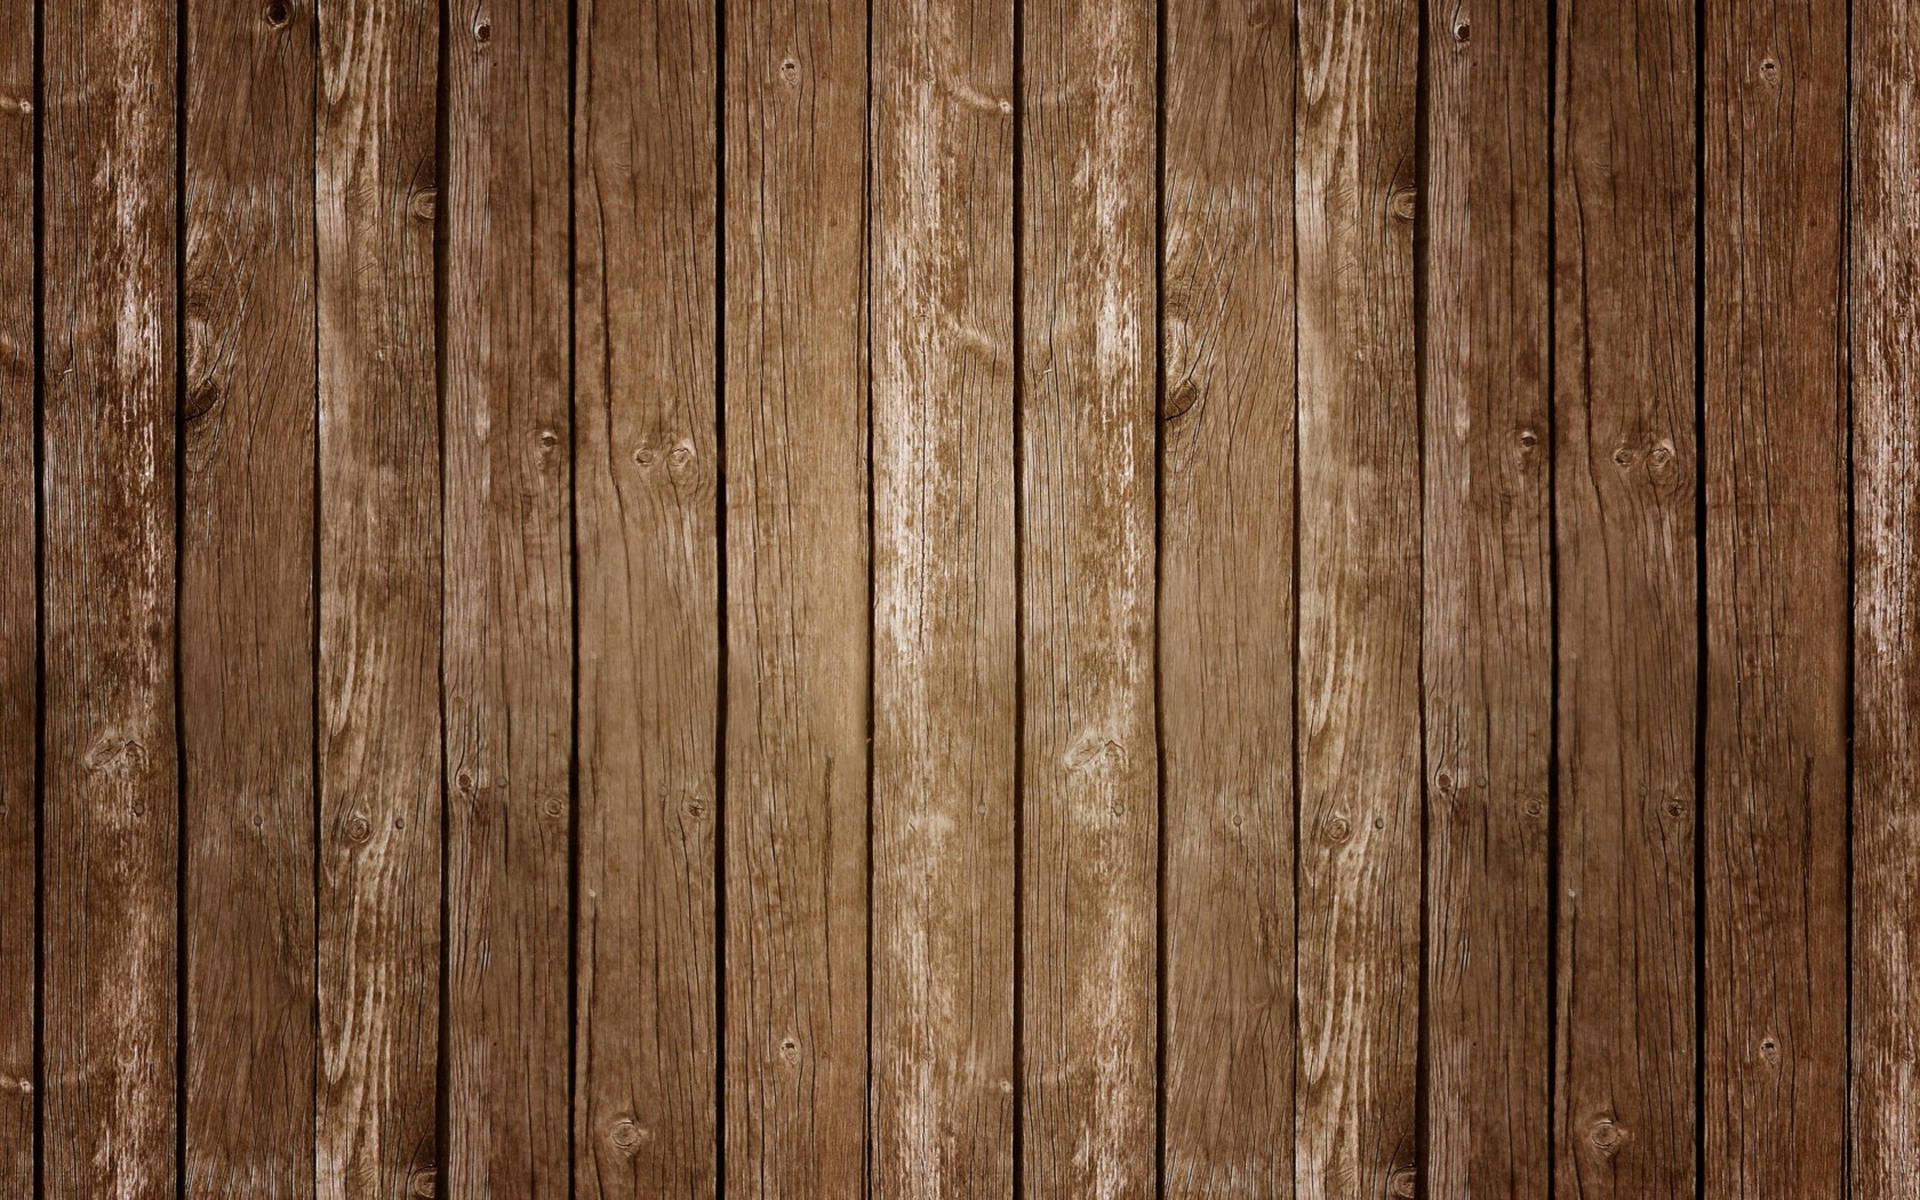 A brown wooden fence with a few nails - Woods